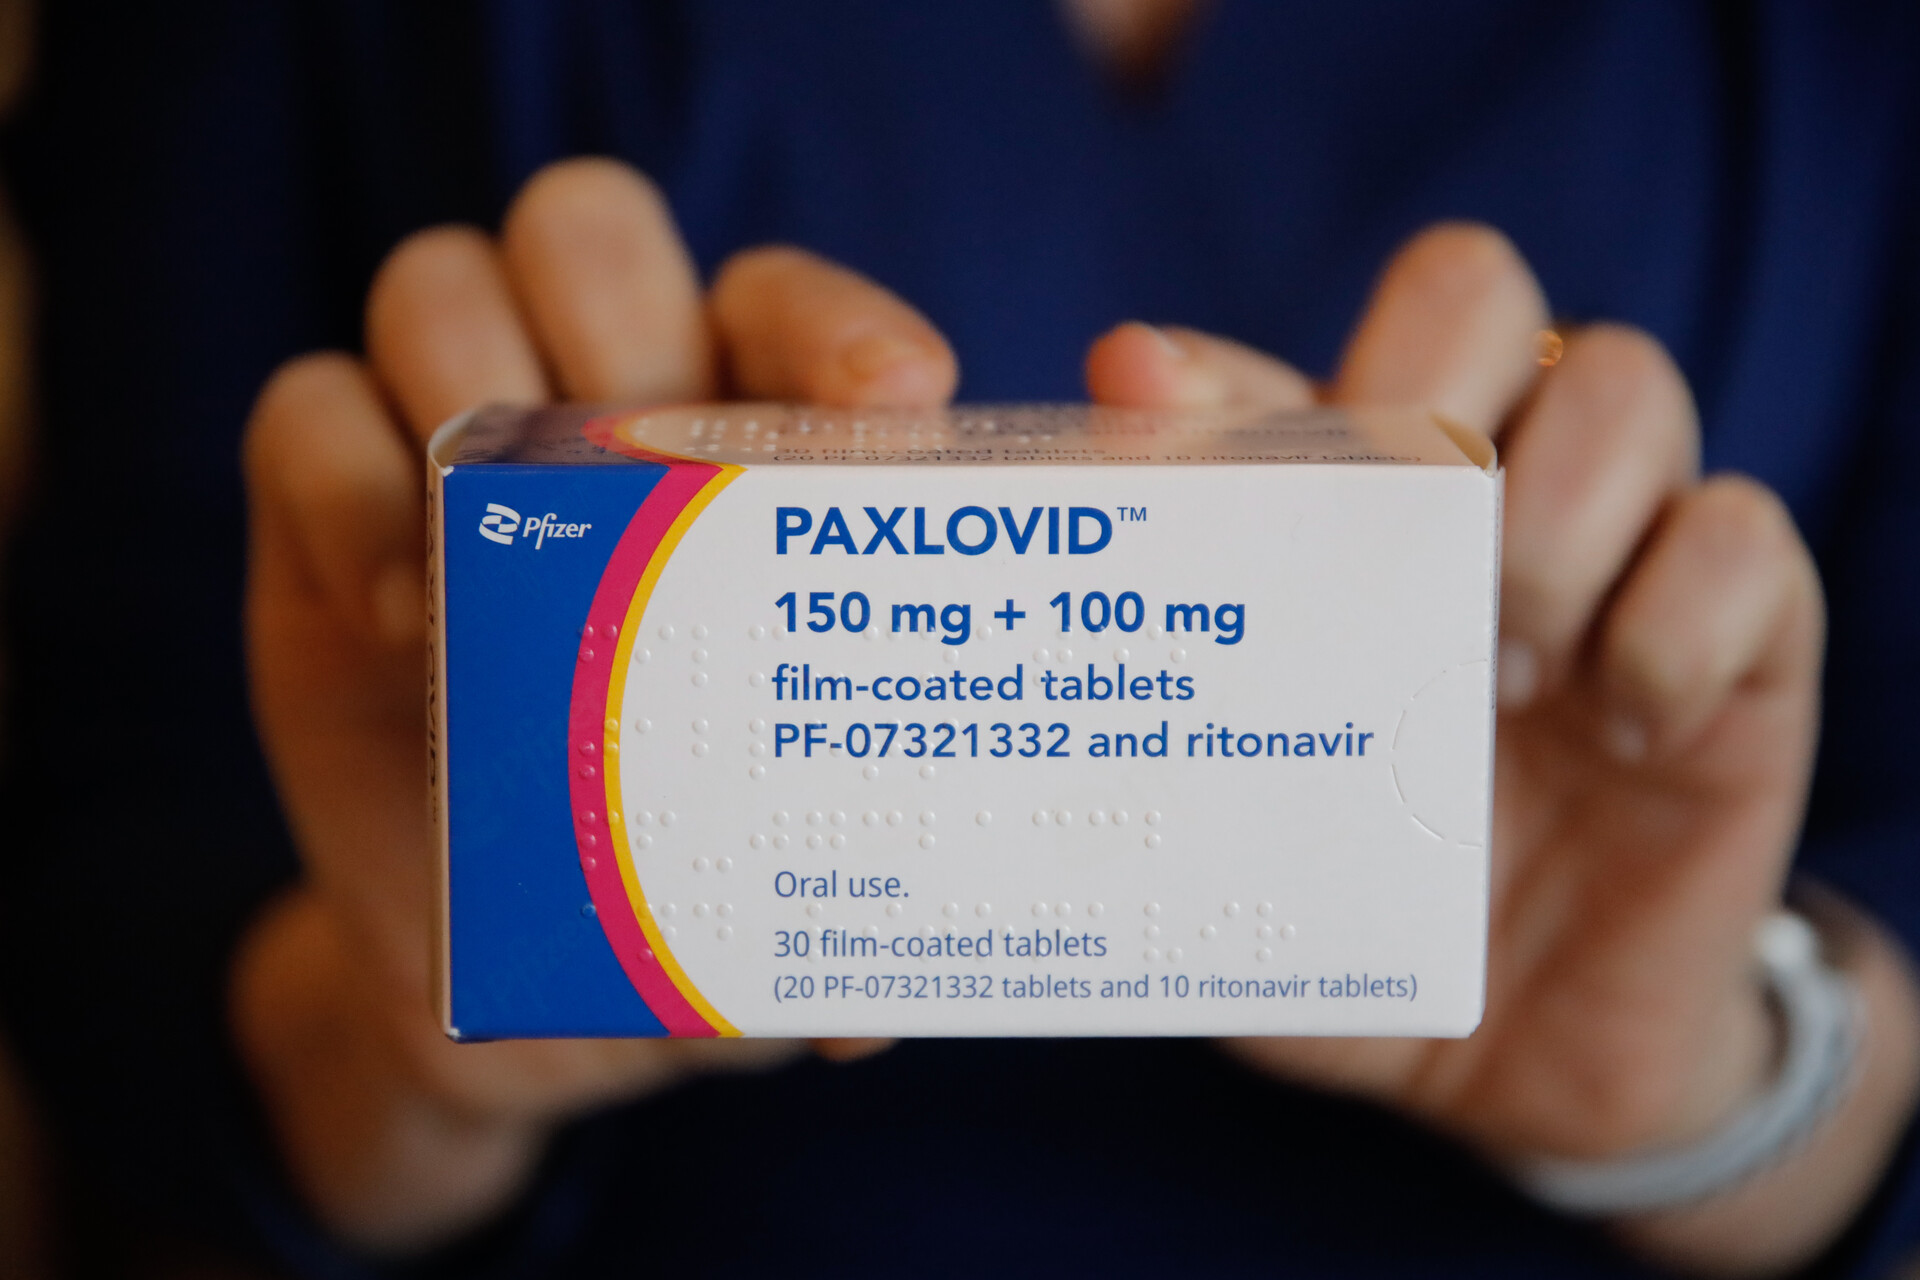 A white medication box with blue, pink and yellow stripes on the left-hand side. The words "Paxlovid 150 mg + 100 mg film-coated tablets" is printed in blue. A woman's hands are holding either side of the box. It's a close-up shot.